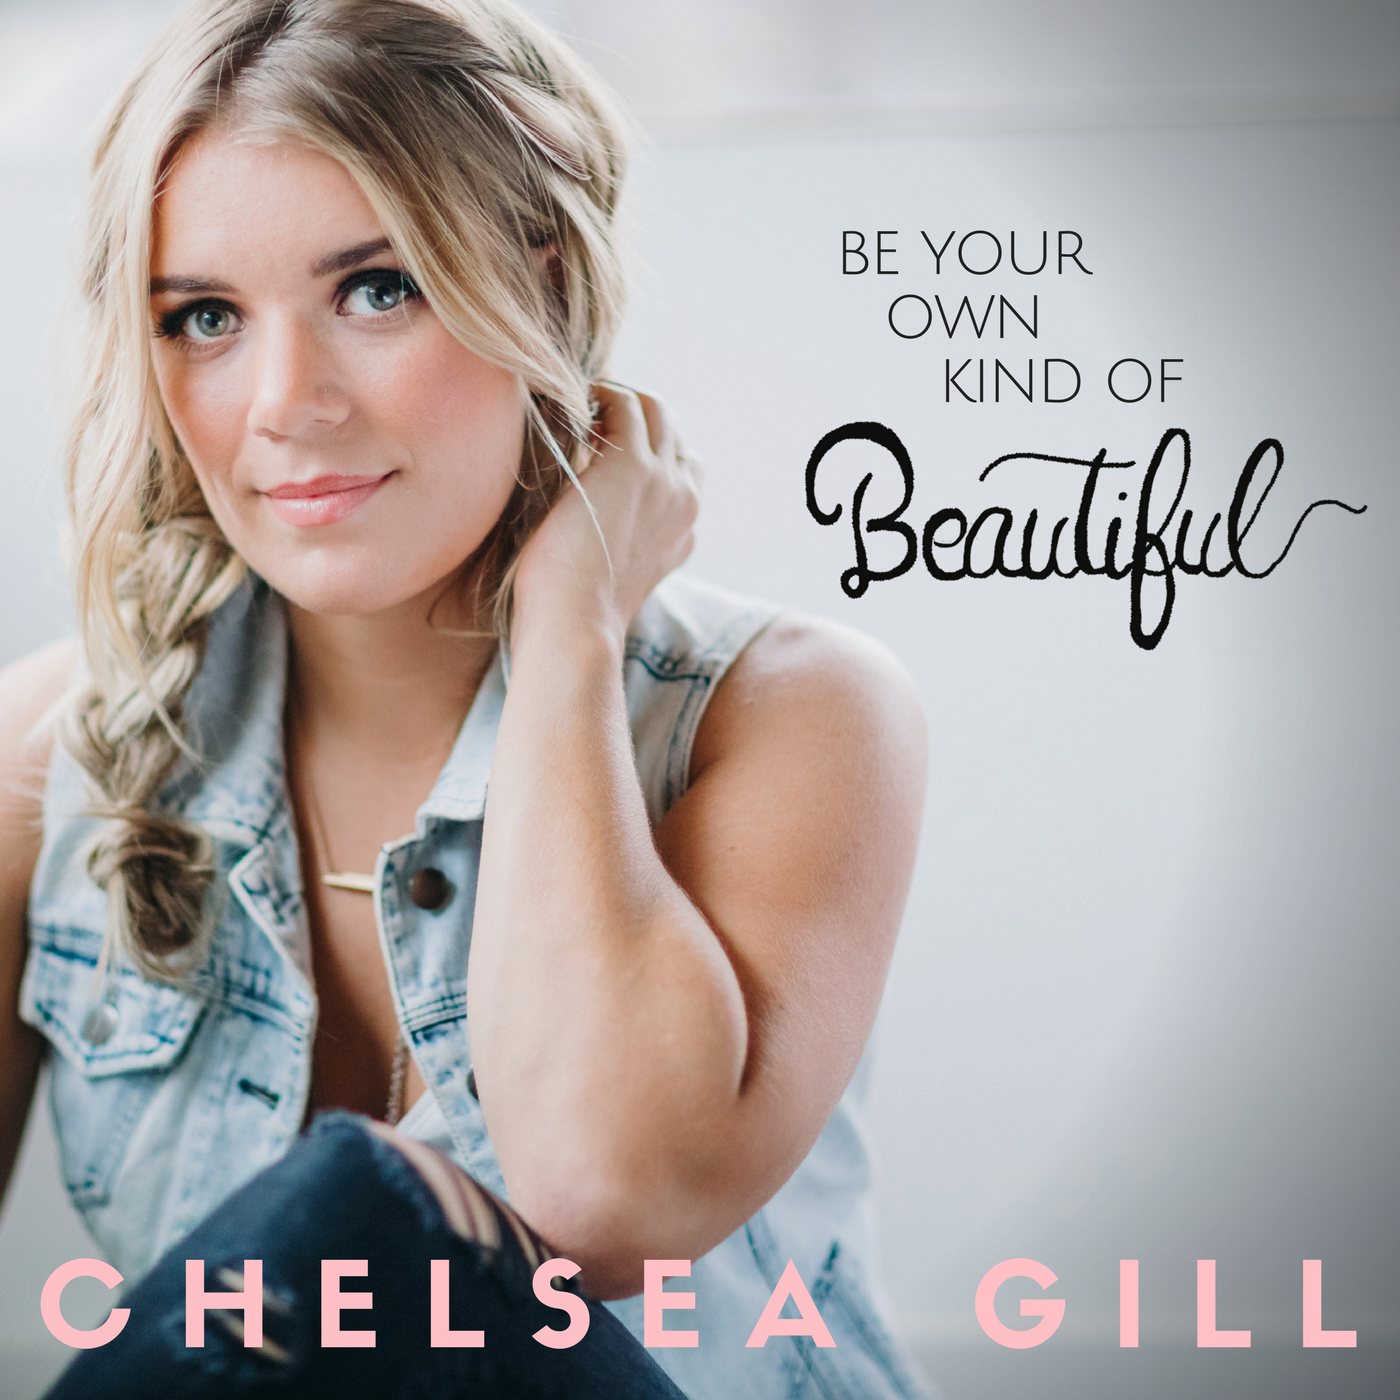 Chelsea Gill is Spreading Love in “Be Your Own Kind of Beautiful” Music Video – WATCH